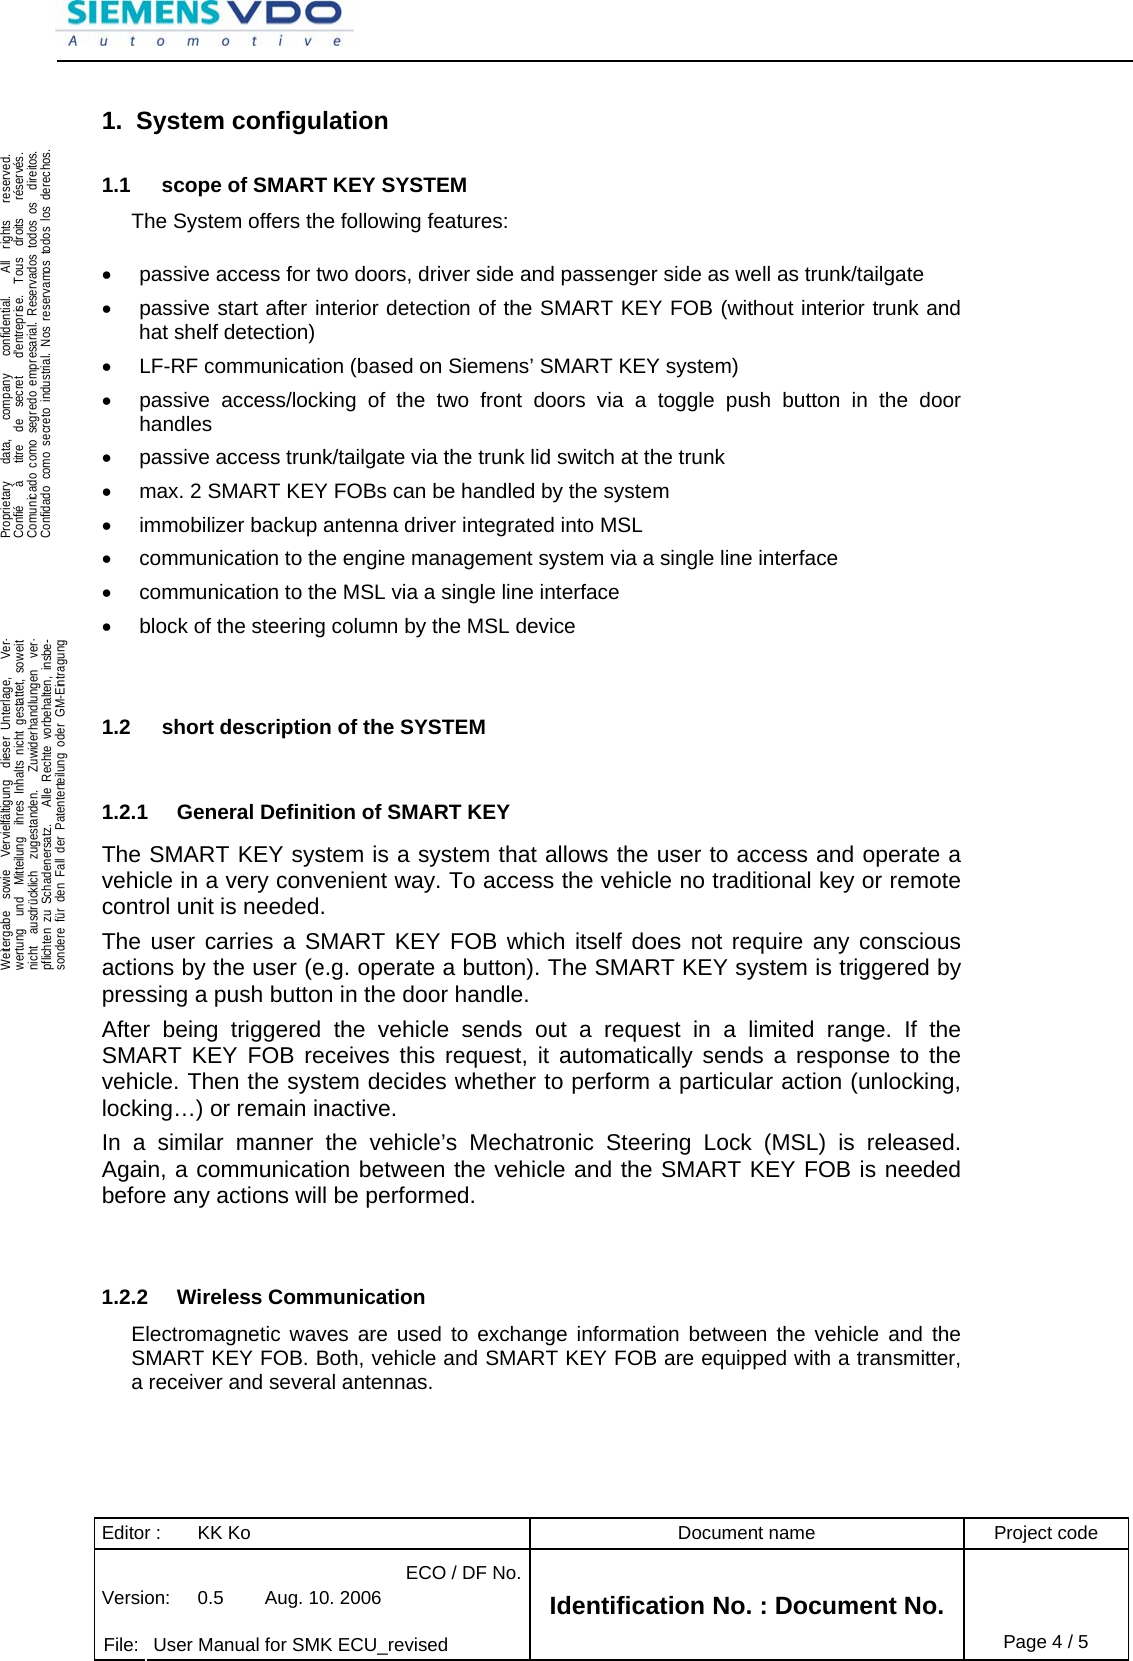 Editor :  KK Ko  Document name  Project code ECO / DF No.Version:  0.5  Aug. 10. 2006    File:  User Manual for SMK ECU_revised Identification No. : Document No. Page 4 / 5    .Proprietary   data,   company   confidential.    All  rights   reserved.Confié   à   titre  de  secret   d&apos;entreprise.  Tous  droits   réservés.Comunicado como segredo empresarial. Reservados todos os  direitos.Confidado como secreto industrial. Nos reservamos todos los derechos.  .Weitergabe  sowie  Vervielfältigung  dieser Unterlage,   Ver-wertung  und  Mitteilung  ihres Inhalts nicht gestattet, soweitnicht  ausdrücklich  zugestanden.   Zuwiderhandlungen  ver-pflichten zu Schadenersatz.   Alle Rechte vorbehalten, insbe-sondere für den Fall der Patenterteilung oder GM-Eintragung  1. System configulation 1.1  scope of SMART KEY SYSTEM The System offers the following features:  •  passive access for two doors, driver side and passenger side as well as trunk/tailgate •  passive start after interior detection of the SMART KEY FOB (without interior trunk and hat shelf detection) •  LF-RF communication (based on Siemens’ SMART KEY system) •  passive access/locking of the two front doors via a toggle push button in the door handles •  passive access trunk/tailgate via the trunk lid switch at the trunk •  max. 2 SMART KEY FOBs can be handled by the system •  immobilizer backup antenna driver integrated into MSL •  communication to the engine management system via a single line interface •  communication to the MSL via a single line interface •  block of the steering column by the MSL device   1.2  short description of the SYSTEM  1.2.1  General Definition of SMART KEY The SMART KEY system is a system that allows the user to access and operate a vehicle in a very convenient way. To access the vehicle no traditional key or remote control unit is needed.  The user carries a SMART KEY FOB which itself does not require any conscious actions by the user (e.g. operate a button). The SMART KEY system is triggered by pressing a push button in the door handle.  After being triggered the vehicle sends out a request in a limited range. If the SMART KEY FOB receives this request, it automatically sends a response to the vehicle. Then the system decides whether to perform a particular action (unlocking, locking…) or remain inactive. In a similar manner the vehicle’s Mechatronic Steering Lock (MSL) is released. Again, a communication between the vehicle and the SMART KEY FOB is needed before any actions will be performed.   1.2.2 Wireless Communication Electromagnetic waves are used to exchange information between the vehicle and the SMART KEY FOB. Both, vehicle and SMART KEY FOB are equipped with a transmitter, a receiver and several antennas.    